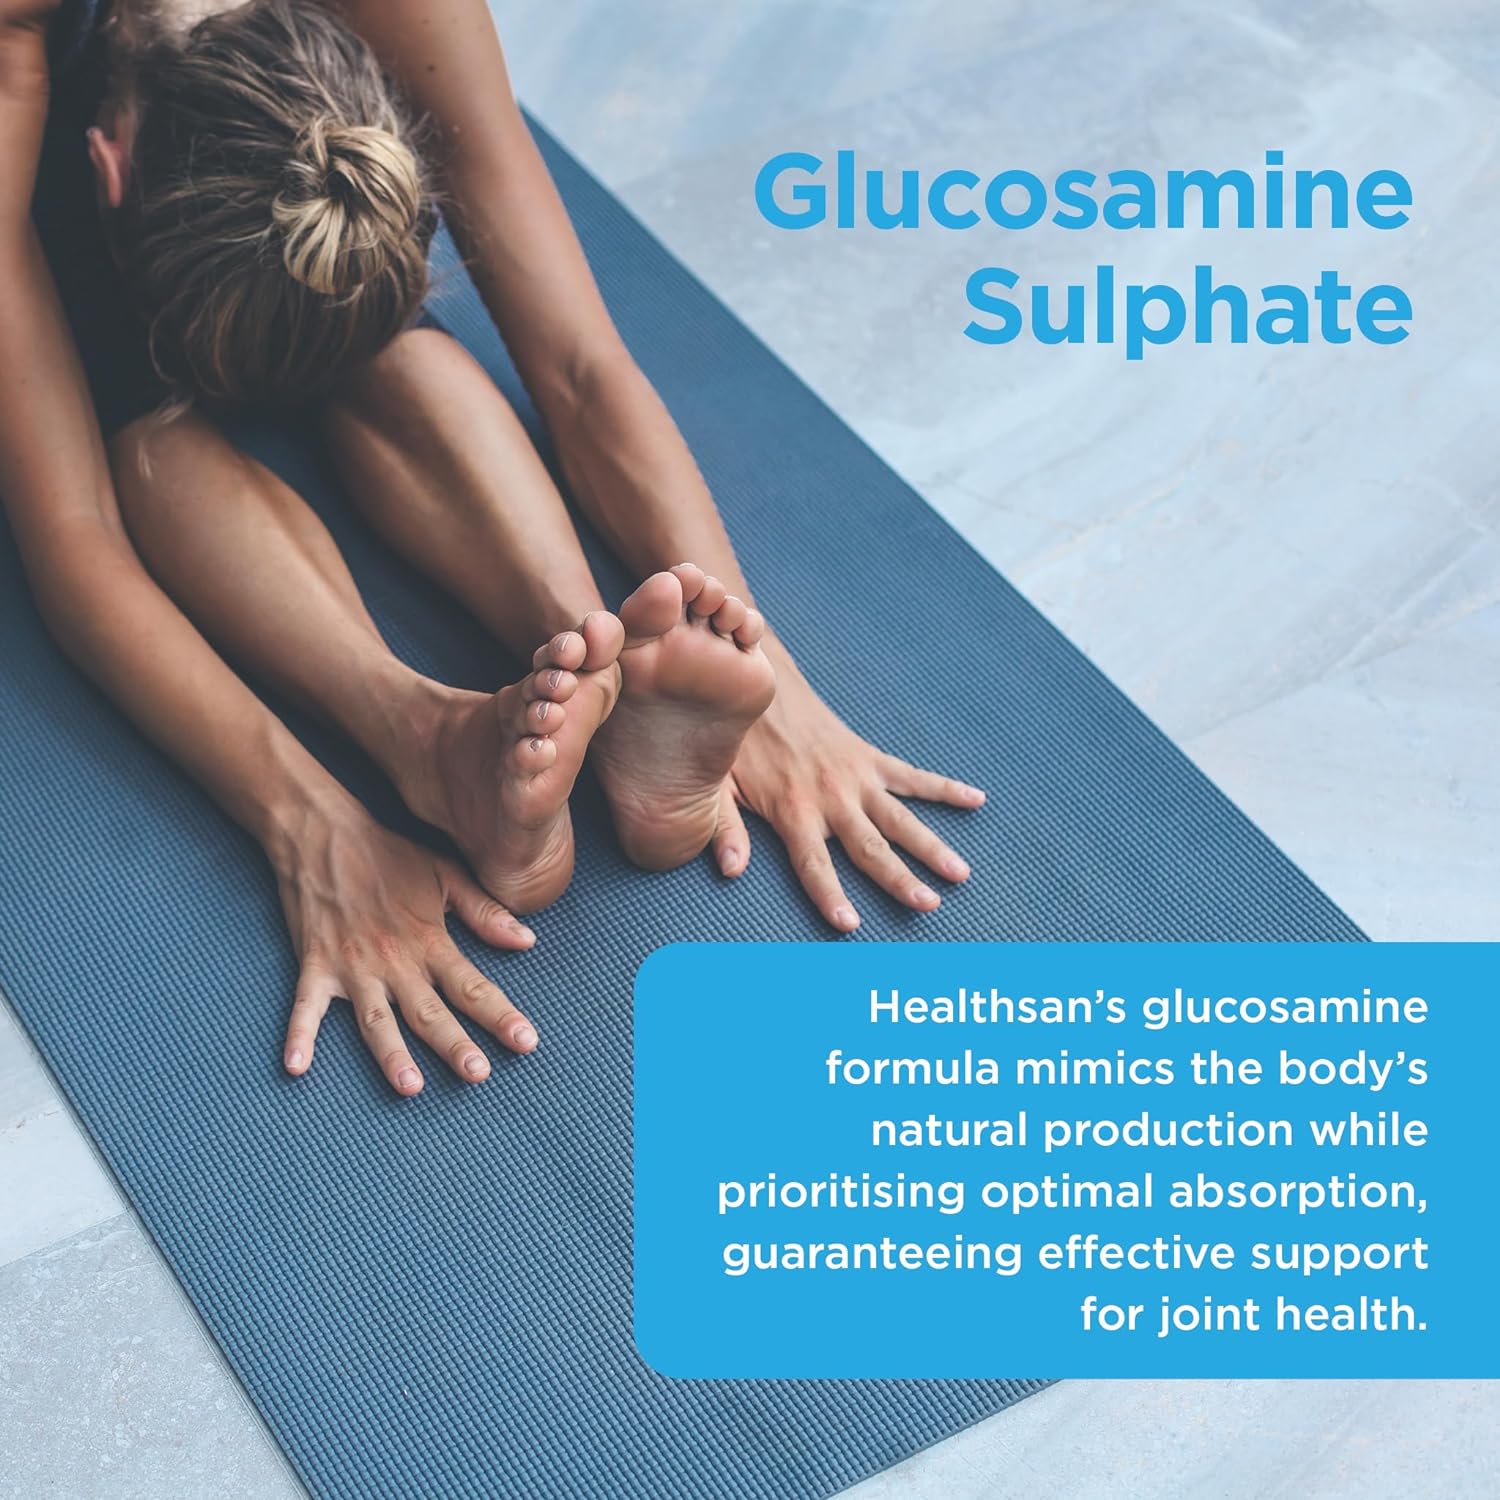 Healthspan Glucosamine Sulphate 2KCI 1,000mg (10 Months’ Supply) | Sustainably sourced Plant-Based glucosamine to Support Your Joints | 591mg Glucosamine Base with 20mg Vitamin C | Vegan